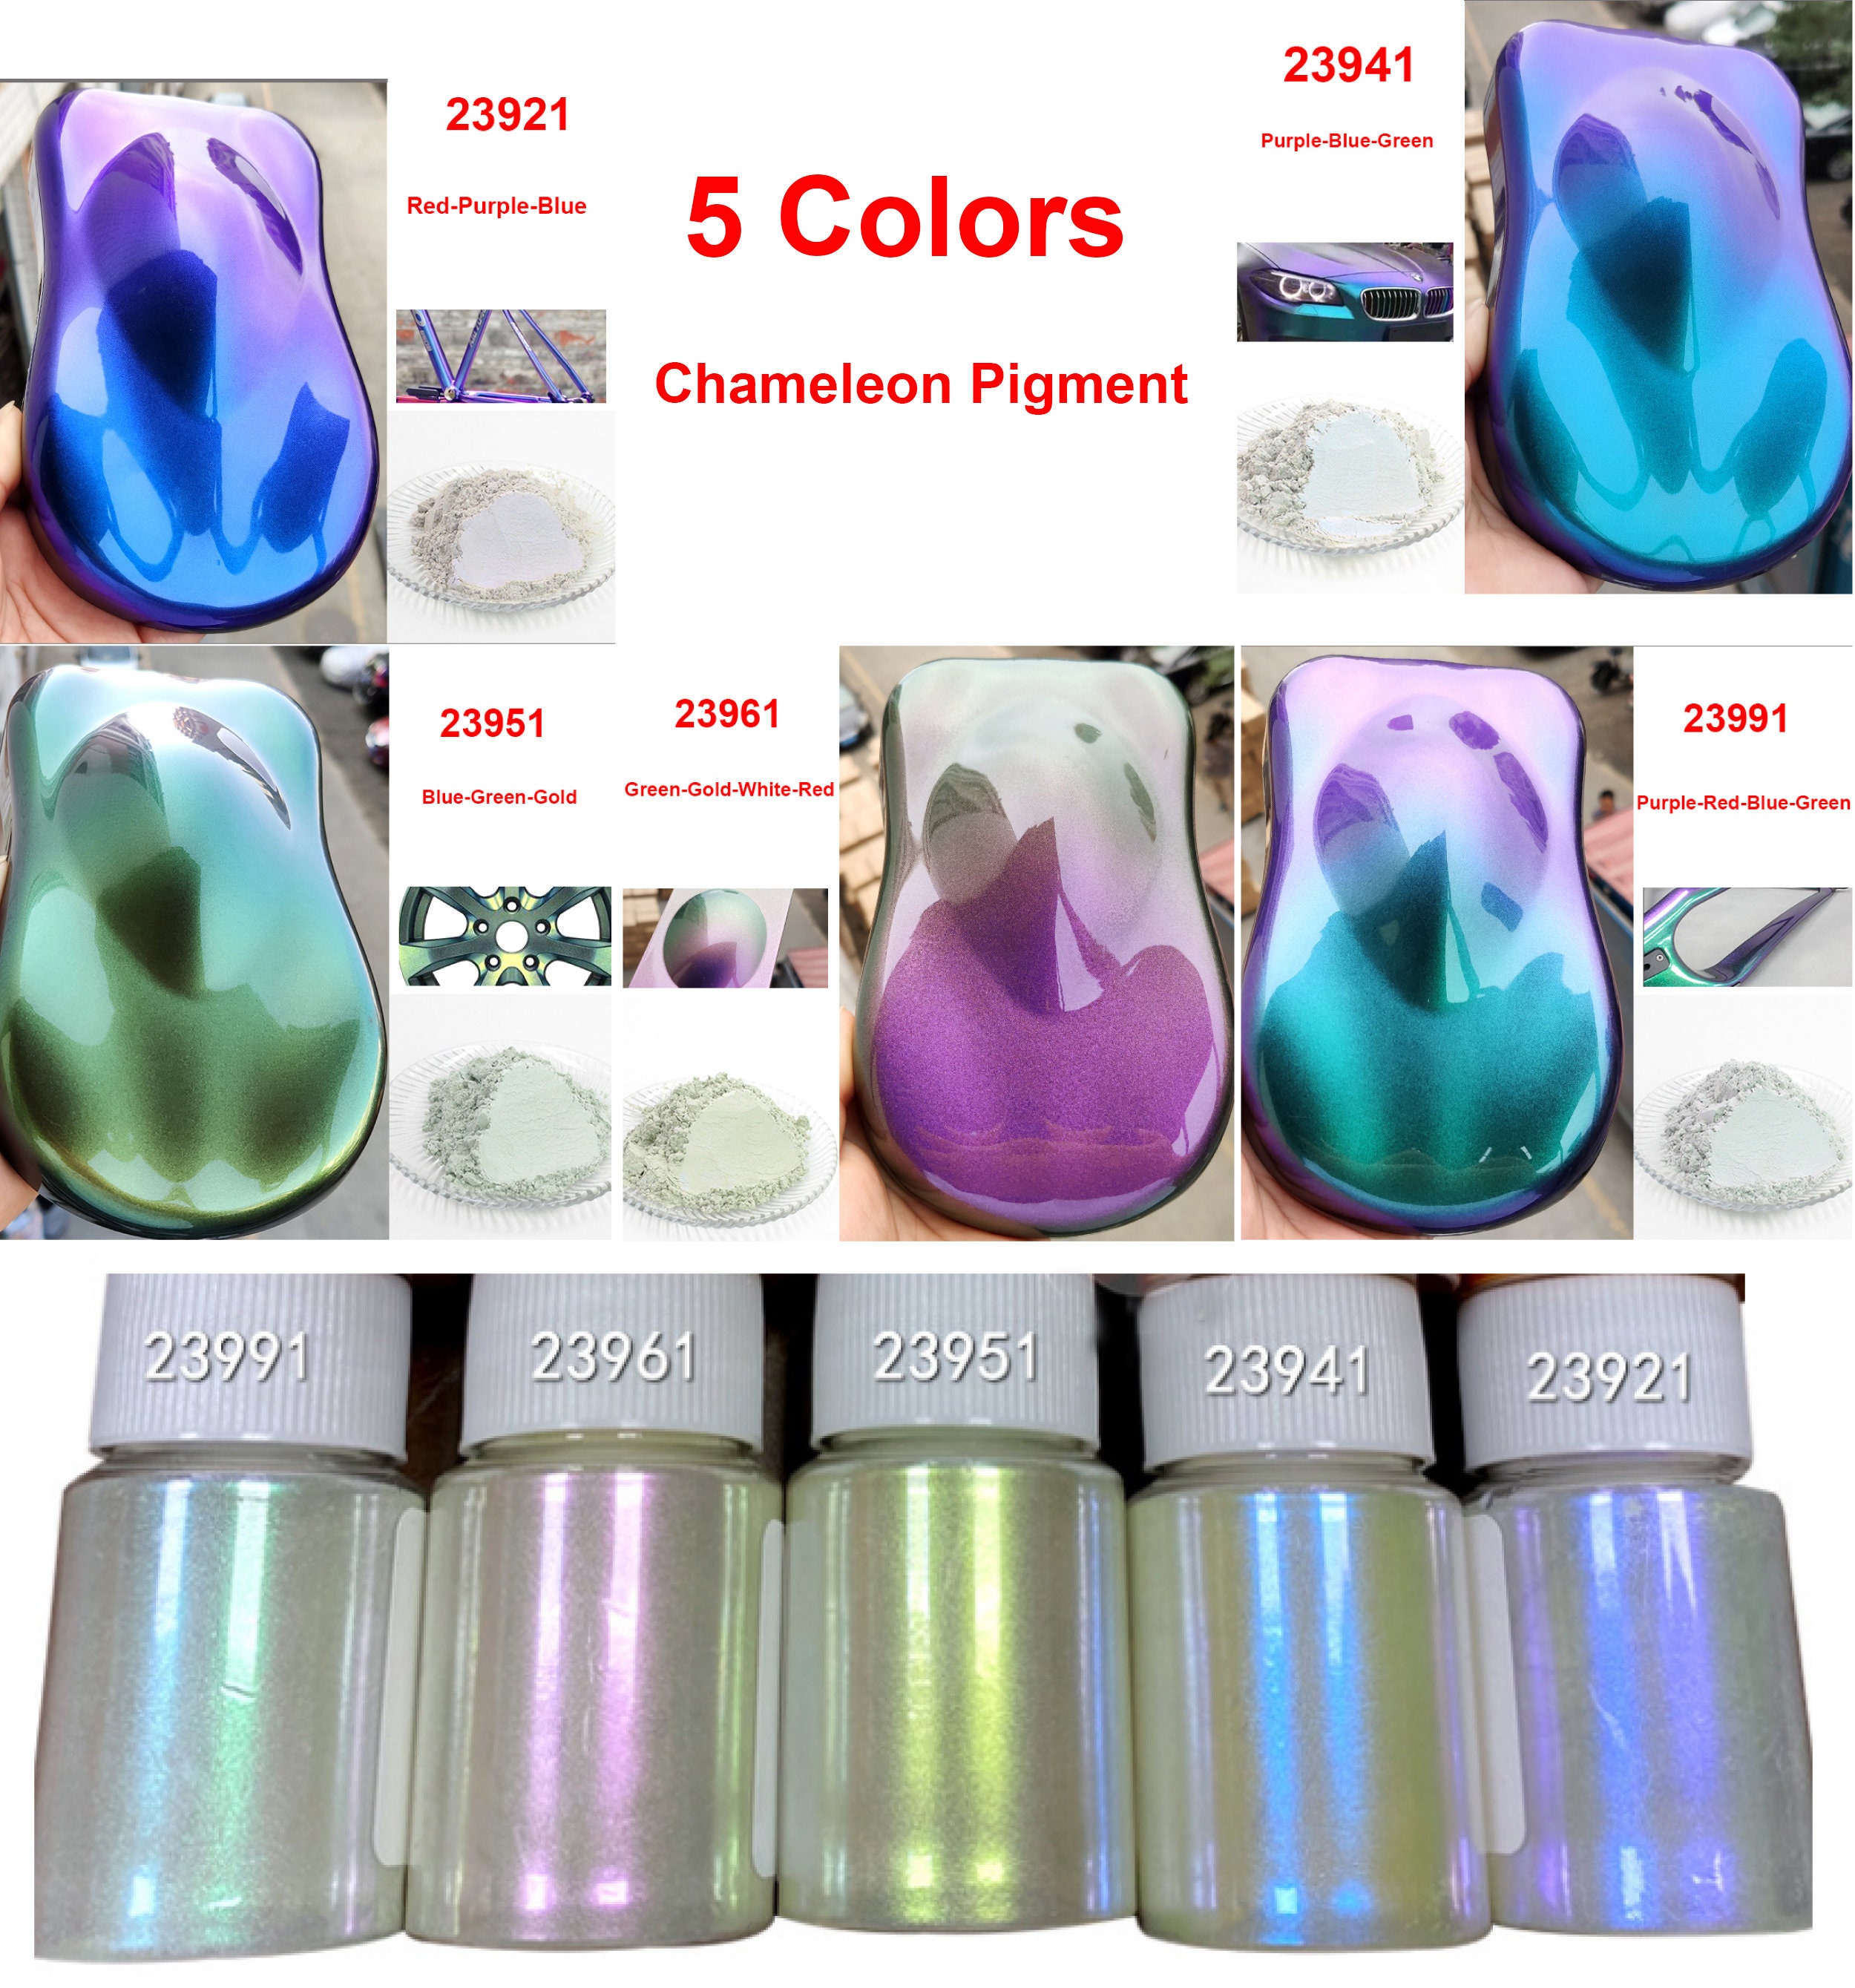 Chameleon Mica Powder for Epoxy Resin Color Shift Mica Powder Pigment for Soap Making, Candle Making,Slime (1g per Jar / 12 Colors)